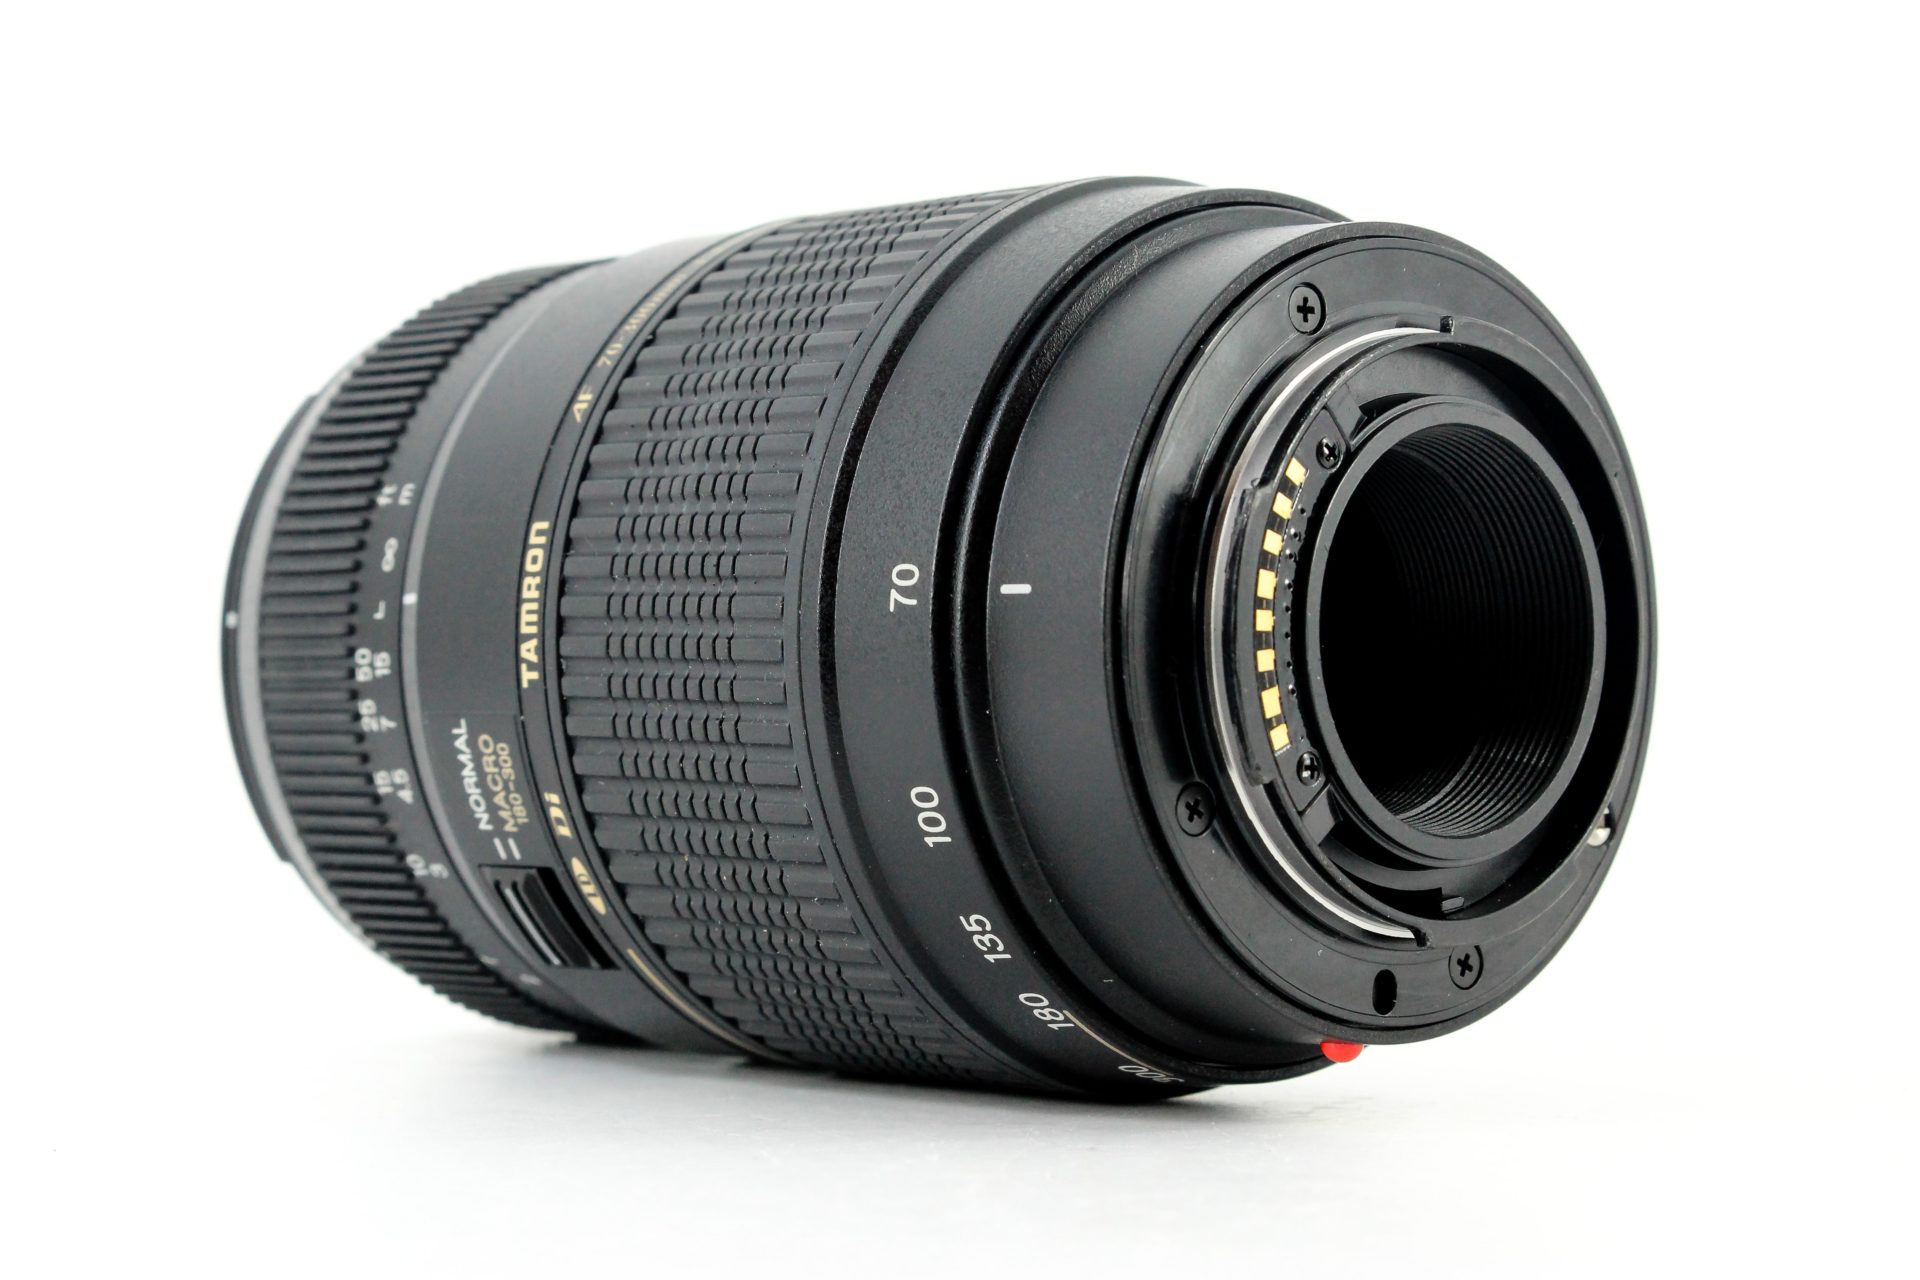 Tamron AF 70-300mm F4-5.6 Di LD Tele-Macro Sony Lens - Lenses and Cameras